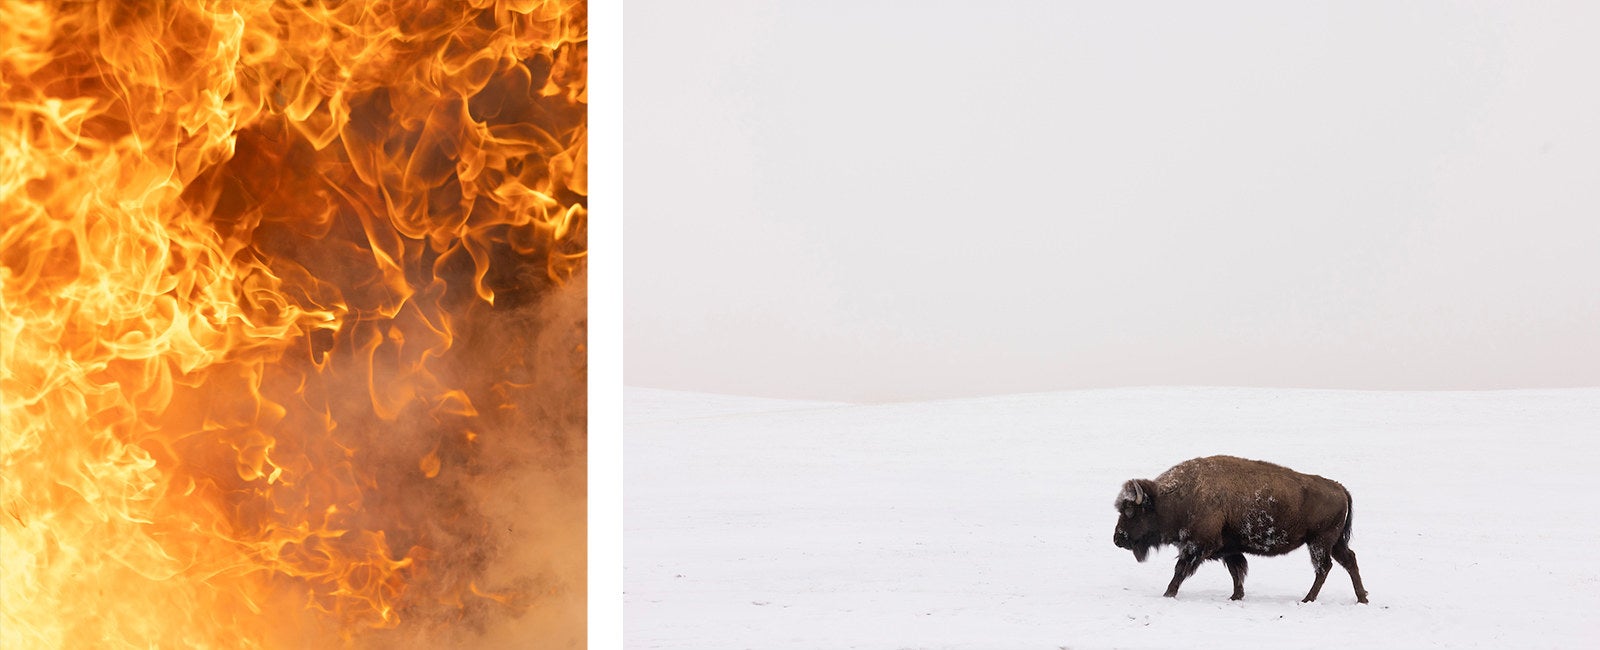 Left: a close-up picture of flames, Right: a buffalo crossing a field of white snow in Custer State Park